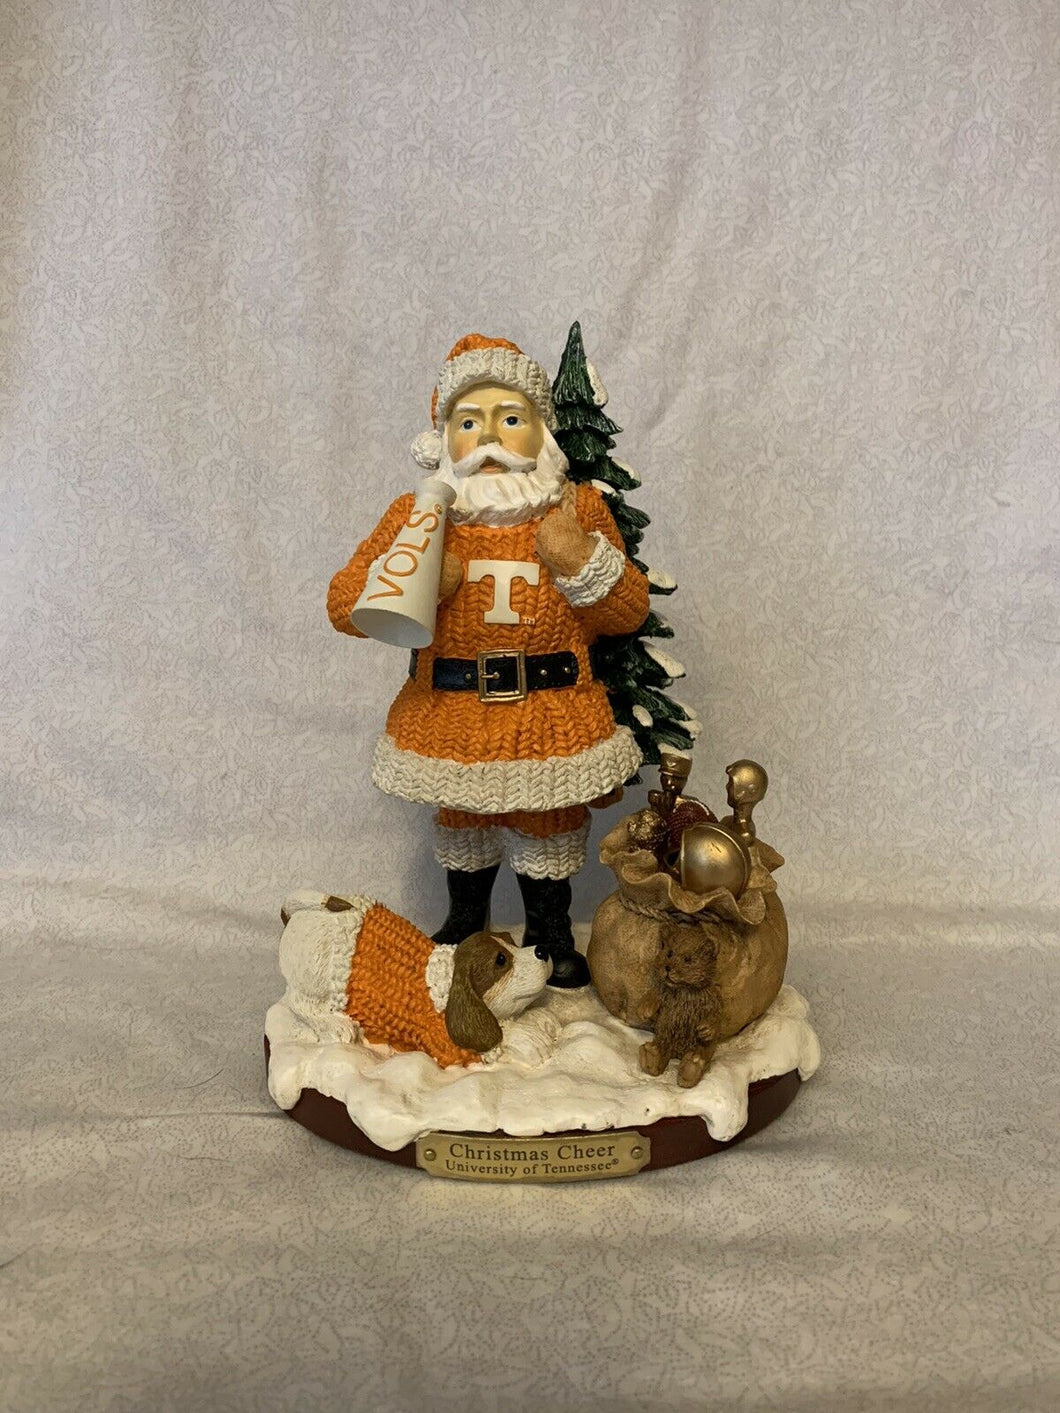 Tennessee Volunteers Santa Claus Christmas Cheer Figurine The Memory Company - Casey's Sports Store